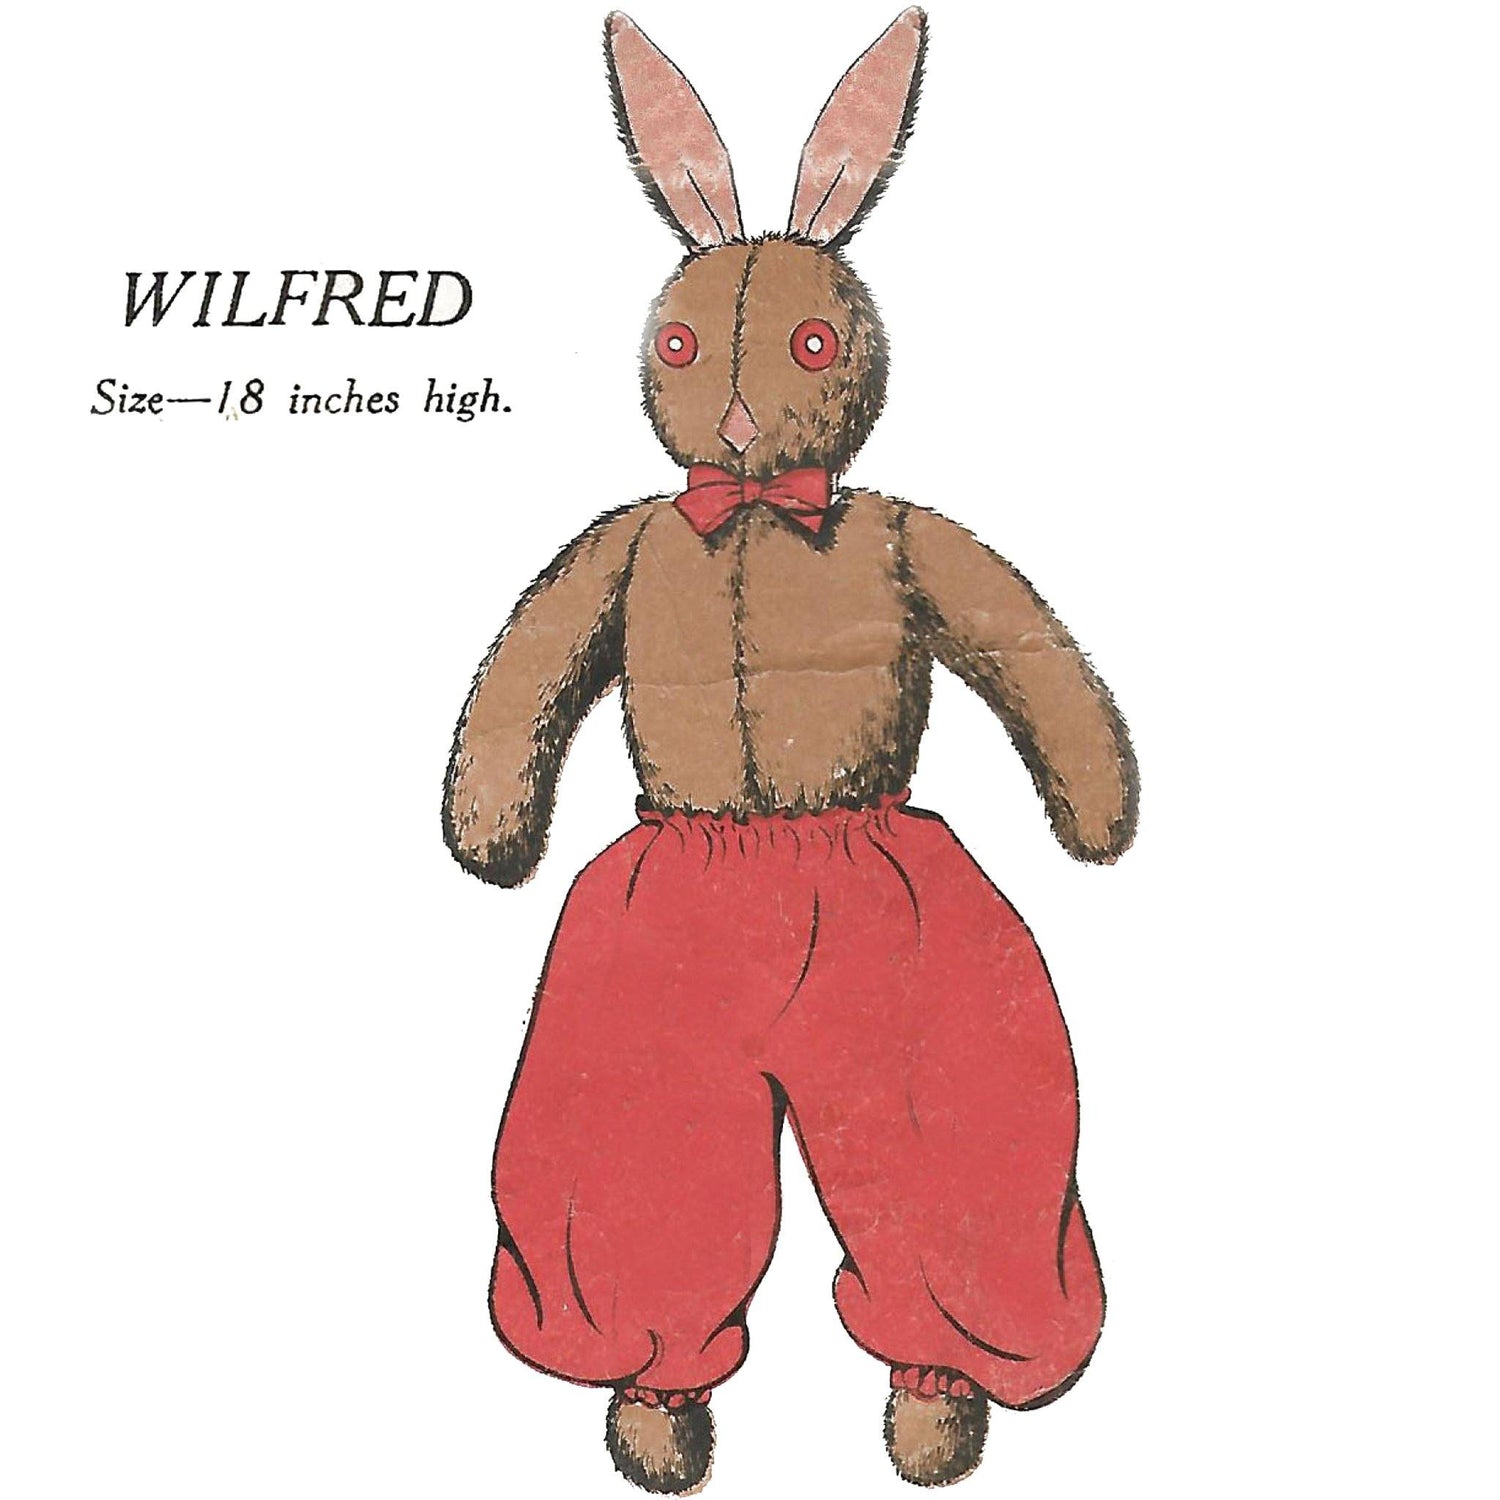 Image of 'Wilfred' stuffed rabbit toy, with brown fur and a red bowtie and trousers.